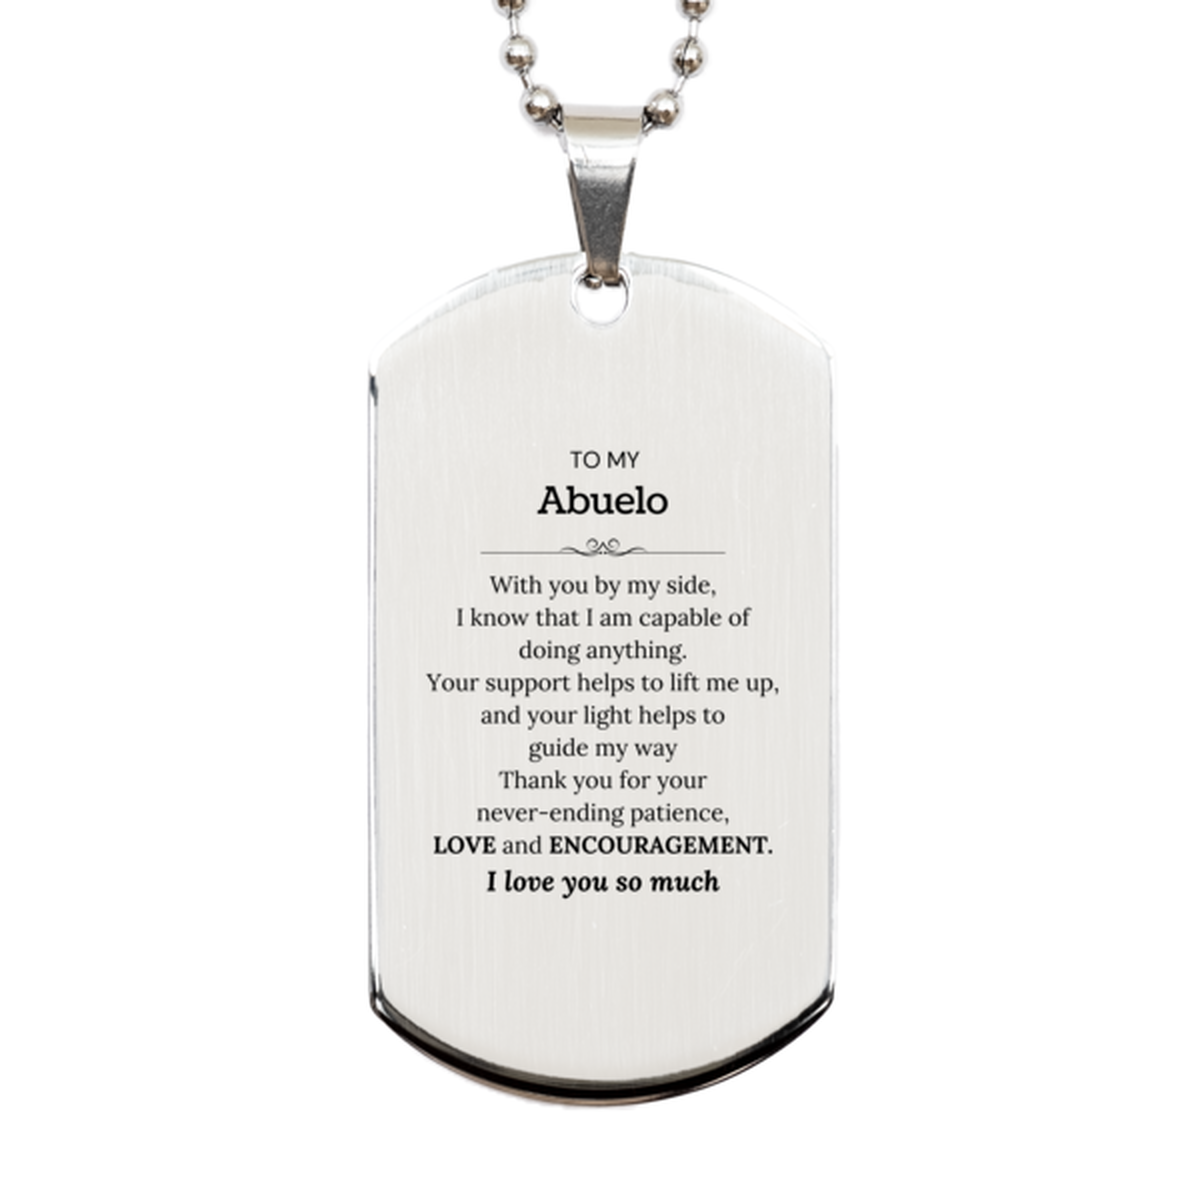 Appreciation Abuelo Silver Dog Tag Gifts, To My Abuelo Birthday Christmas Wedding Keepsake Gifts for Abuelo With you by my side, I know that I am capable of doing anything. I love you so much